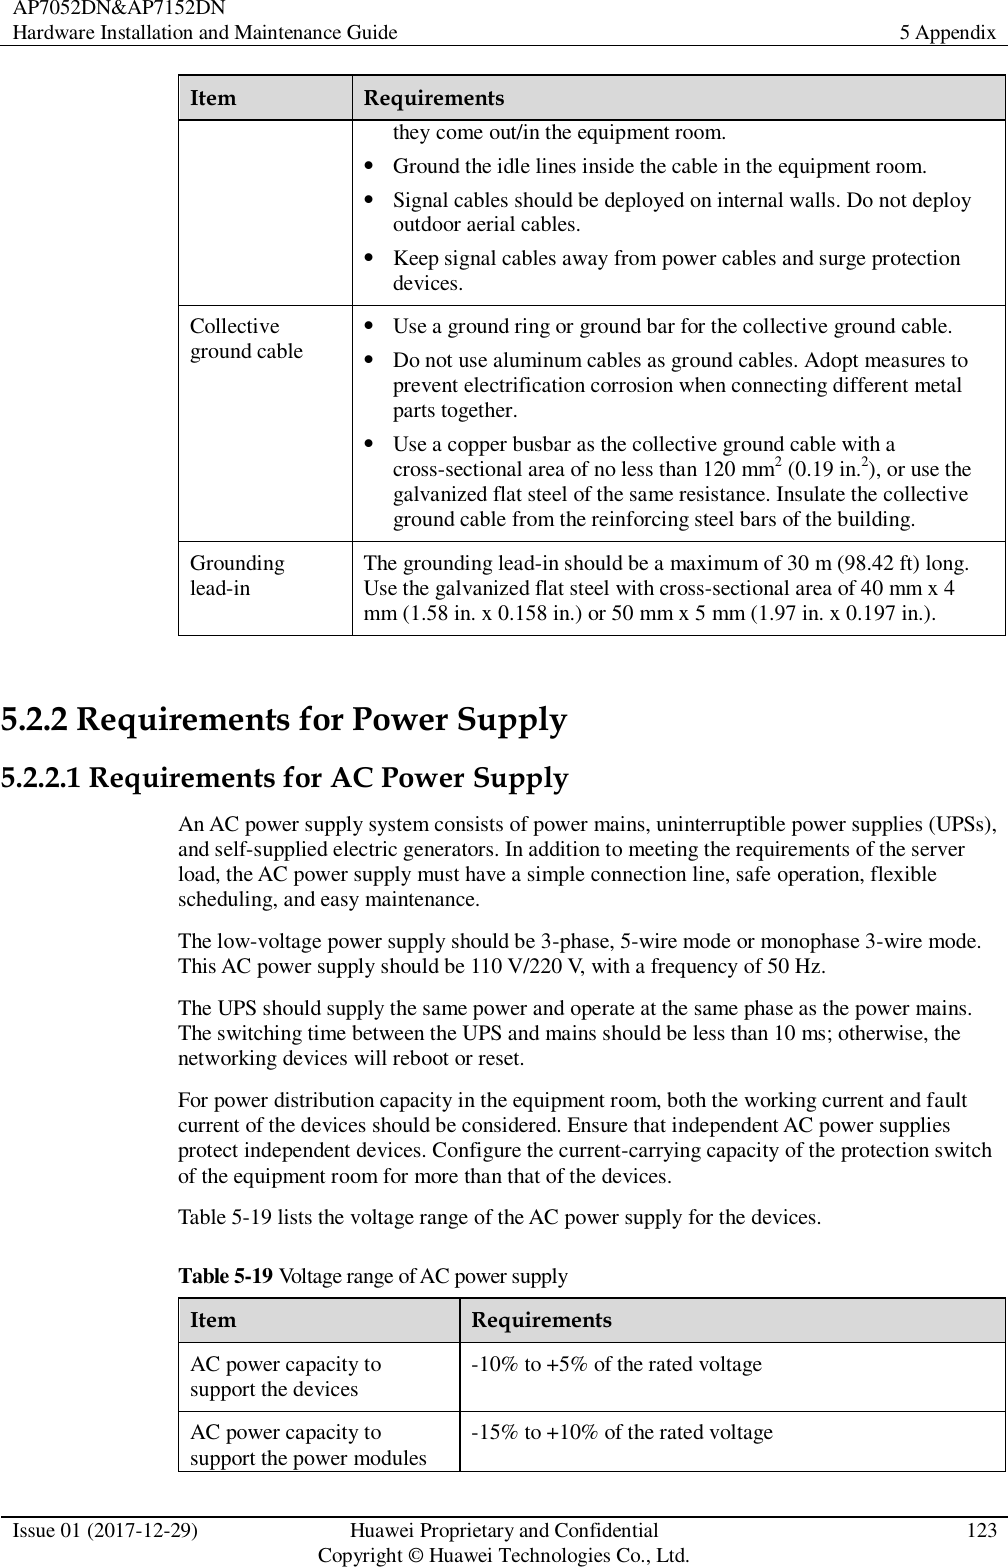 AP7052DN&amp;AP7152DN Hardware Installation and Maintenance Guide 5 Appendix  Issue 01 (2017-12-29) Huawei Proprietary and Confidential                                     Copyright © Huawei Technologies Co., Ltd. 123  Item Requirements they come out/in the equipment room.  Ground the idle lines inside the cable in the equipment room.  Signal cables should be deployed on internal walls. Do not deploy outdoor aerial cables.  Keep signal cables away from power cables and surge protection devices. Collective ground cable  Use a ground ring or ground bar for the collective ground cable.  Do not use aluminum cables as ground cables. Adopt measures to prevent electrification corrosion when connecting different metal parts together.  Use a copper busbar as the collective ground cable with a cross-sectional area of no less than 120 mm2 (0.19 in.2), or use the galvanized flat steel of the same resistance. Insulate the collective ground cable from the reinforcing steel bars of the building. Grounding lead-in The grounding lead-in should be a maximum of 30 m (98.42 ft) long. Use the galvanized flat steel with cross-sectional area of 40 mm x 4 mm (1.58 in. x 0.158 in.) or 50 mm x 5 mm (1.97 in. x 0.197 in.).  5.2.2 Requirements for Power Supply 5.2.2.1 Requirements for AC Power Supply An AC power supply system consists of power mains, uninterruptible power supplies (UPSs), and self-supplied electric generators. In addition to meeting the requirements of the server load, the AC power supply must have a simple connection line, safe operation, flexible scheduling, and easy maintenance. The low-voltage power supply should be 3-phase, 5-wire mode or monophase 3-wire mode. This AC power supply should be 110 V/220 V, with a frequency of 50 Hz. The UPS should supply the same power and operate at the same phase as the power mains. The switching time between the UPS and mains should be less than 10 ms; otherwise, the networking devices will reboot or reset. For power distribution capacity in the equipment room, both the working current and fault current of the devices should be considered. Ensure that independent AC power supplies protect independent devices. Configure the current-carrying capacity of the protection switch of the equipment room for more than that of the devices. Table 5-19 lists the voltage range of the AC power supply for the devices. Table 5-19 Voltage range of AC power supply Item Requirements AC power capacity to support the devices -10% to +5% of the rated voltage AC power capacity to support the power modules -15% to +10% of the rated voltage 